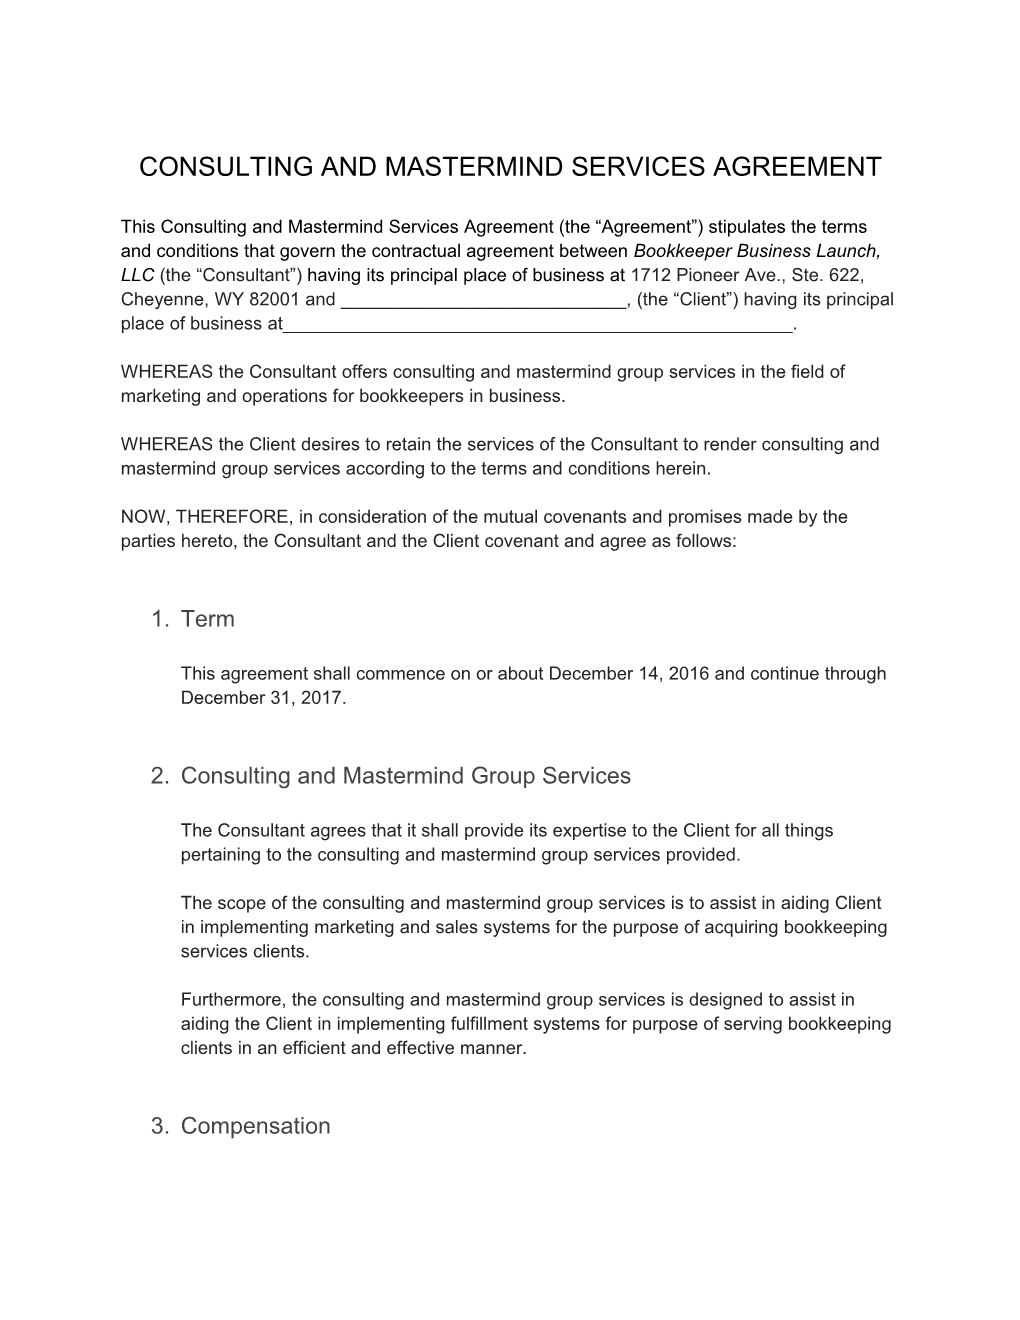 Consulting and Mastermind Services Agreement